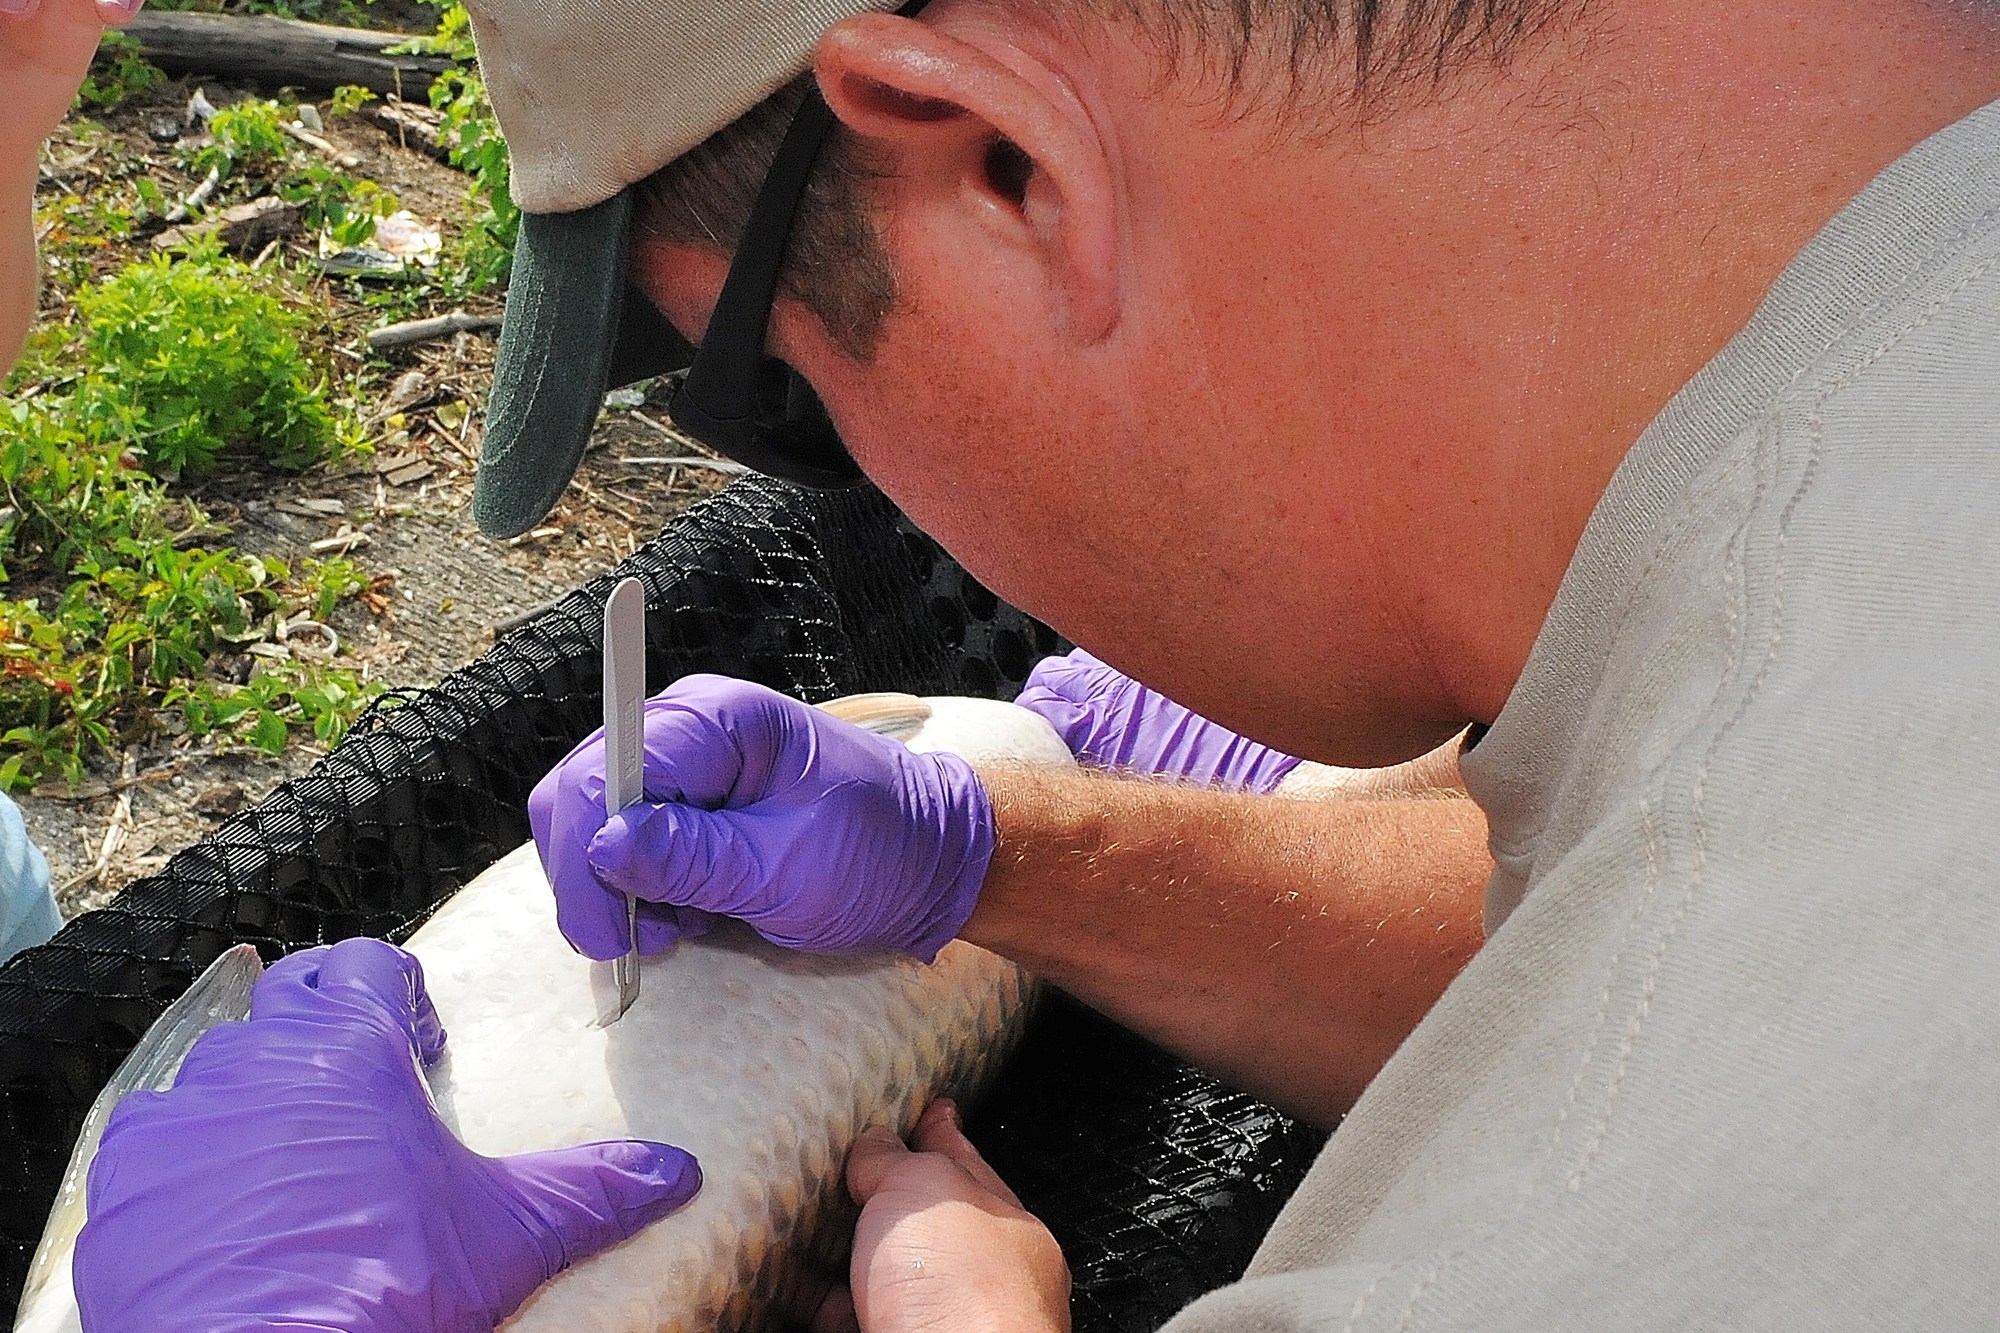 Michigan Department of Natural Resources fisheries biologist Cleyo Harris makes an incision into the stomach cavity of a grass carp for tagging.